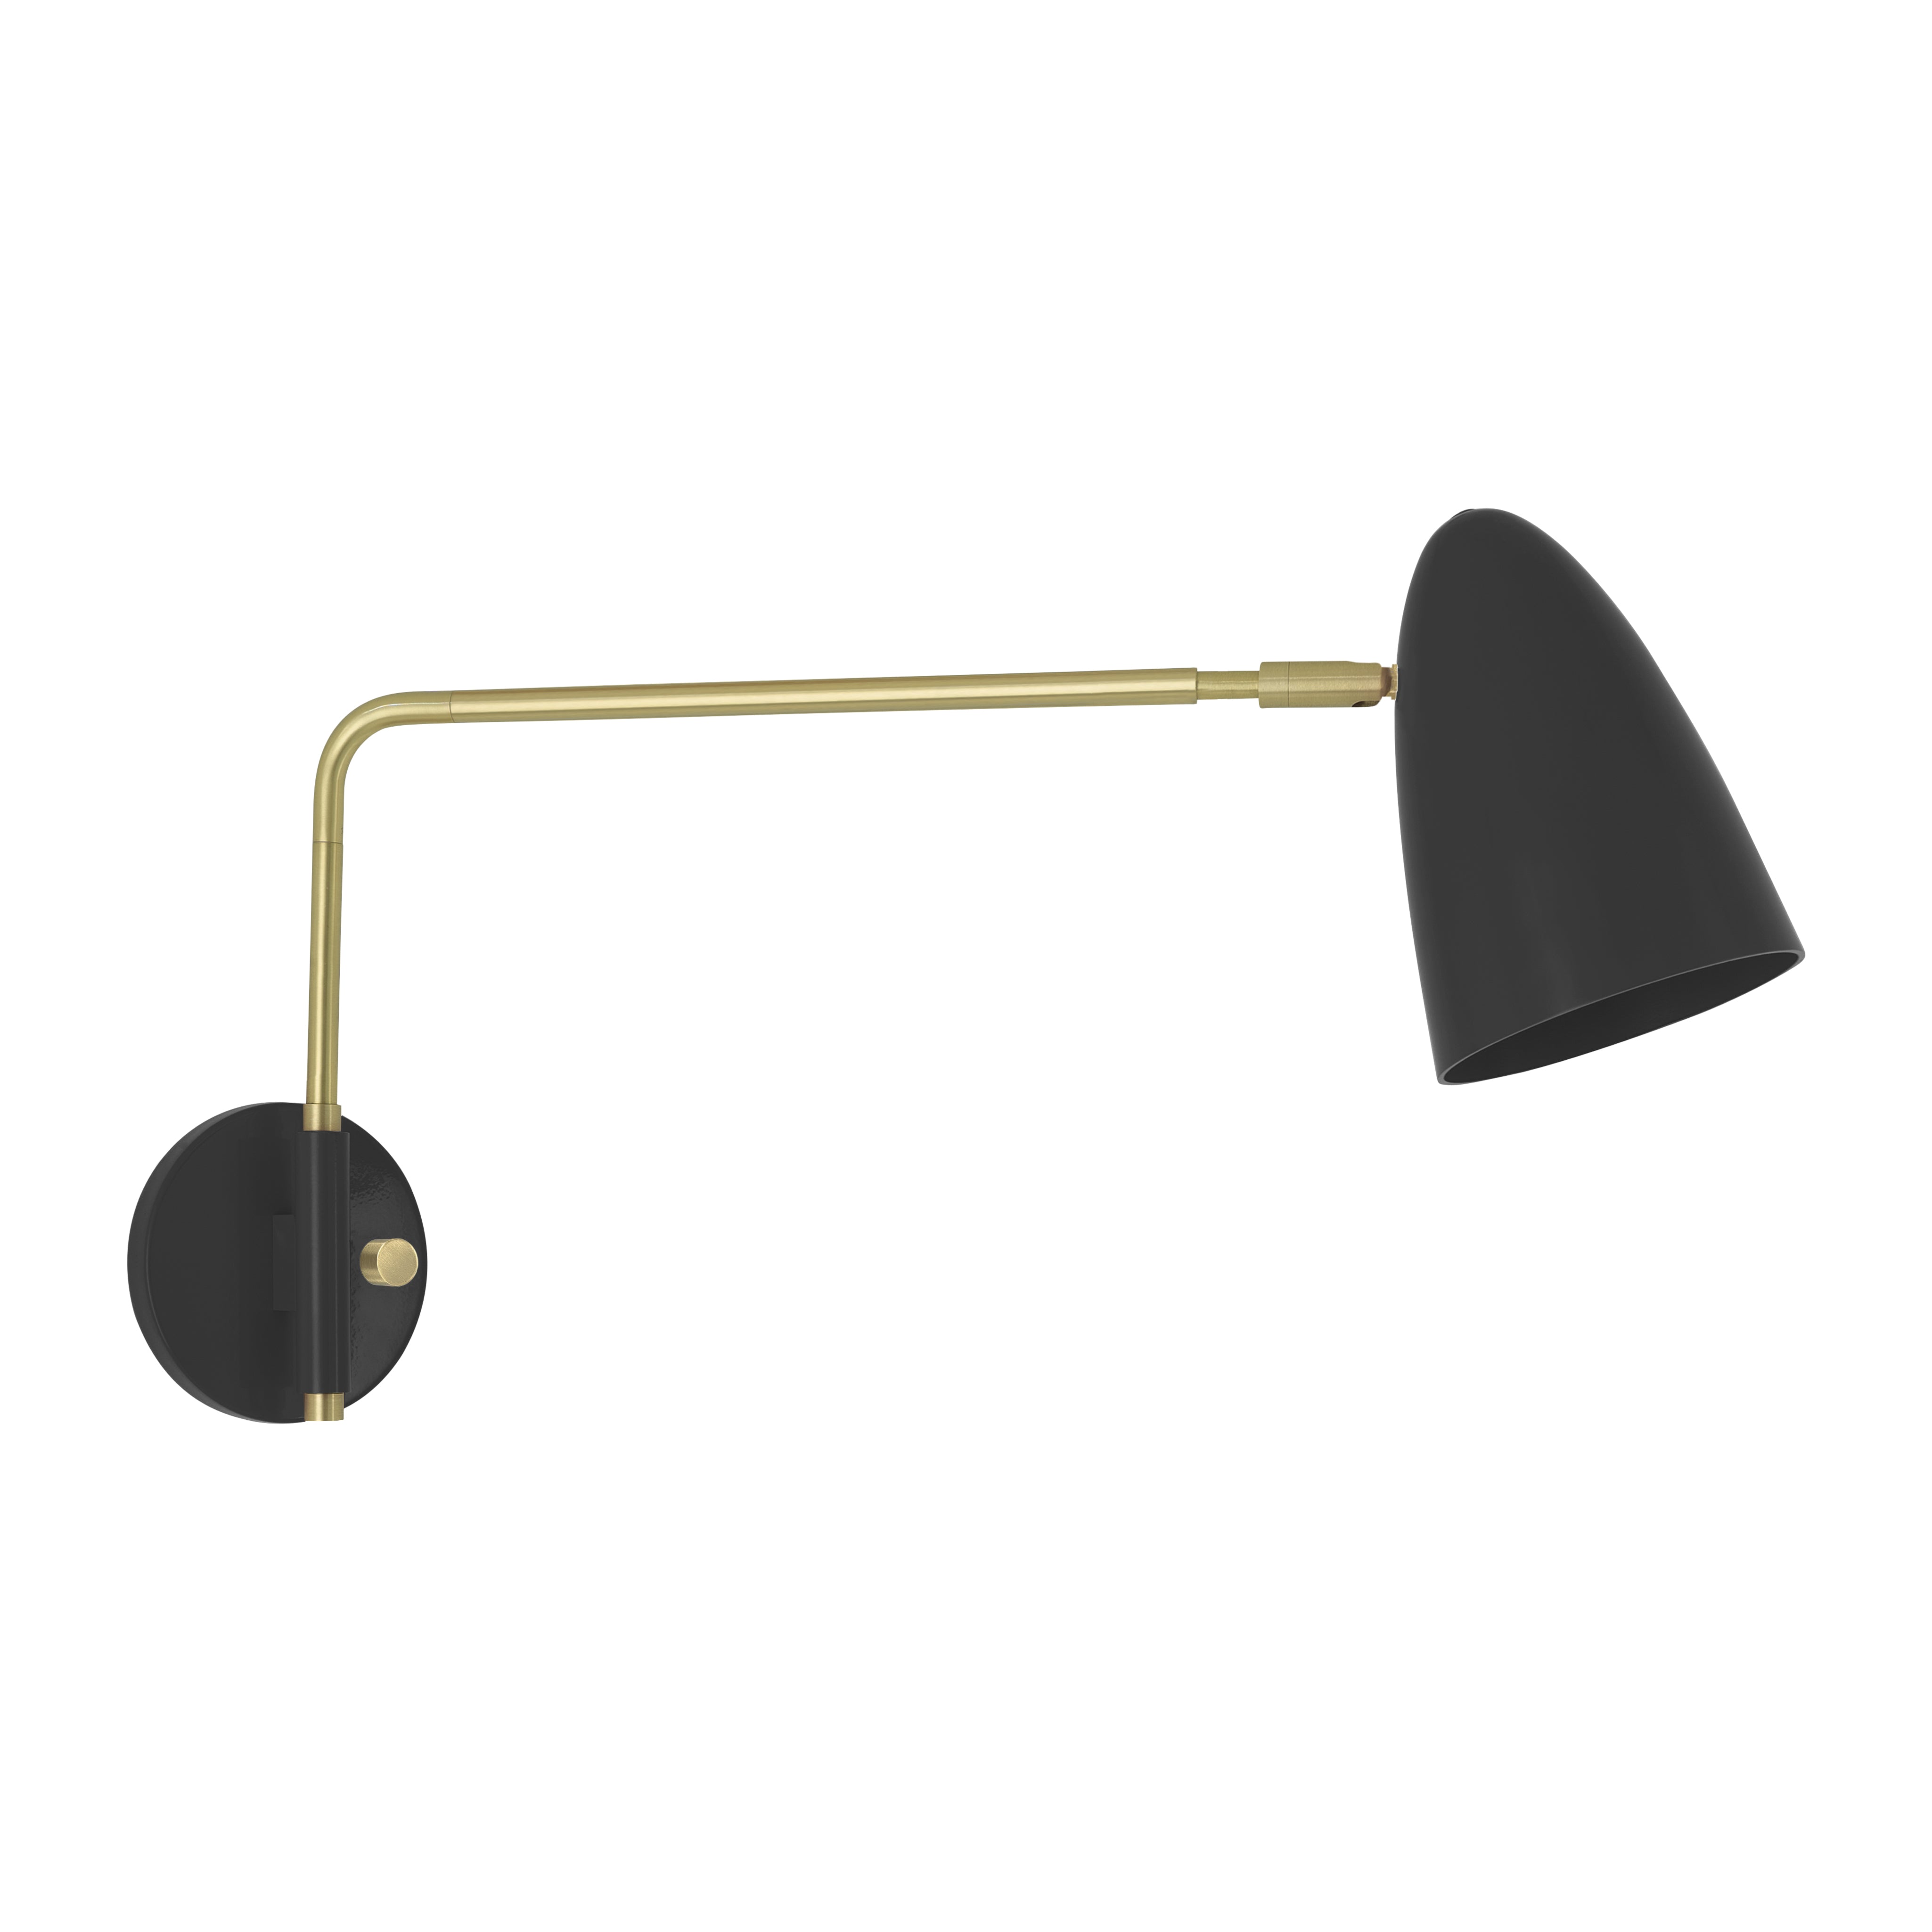 Brass and black color Boom Swing Arm sconce Dutton Brown lighting